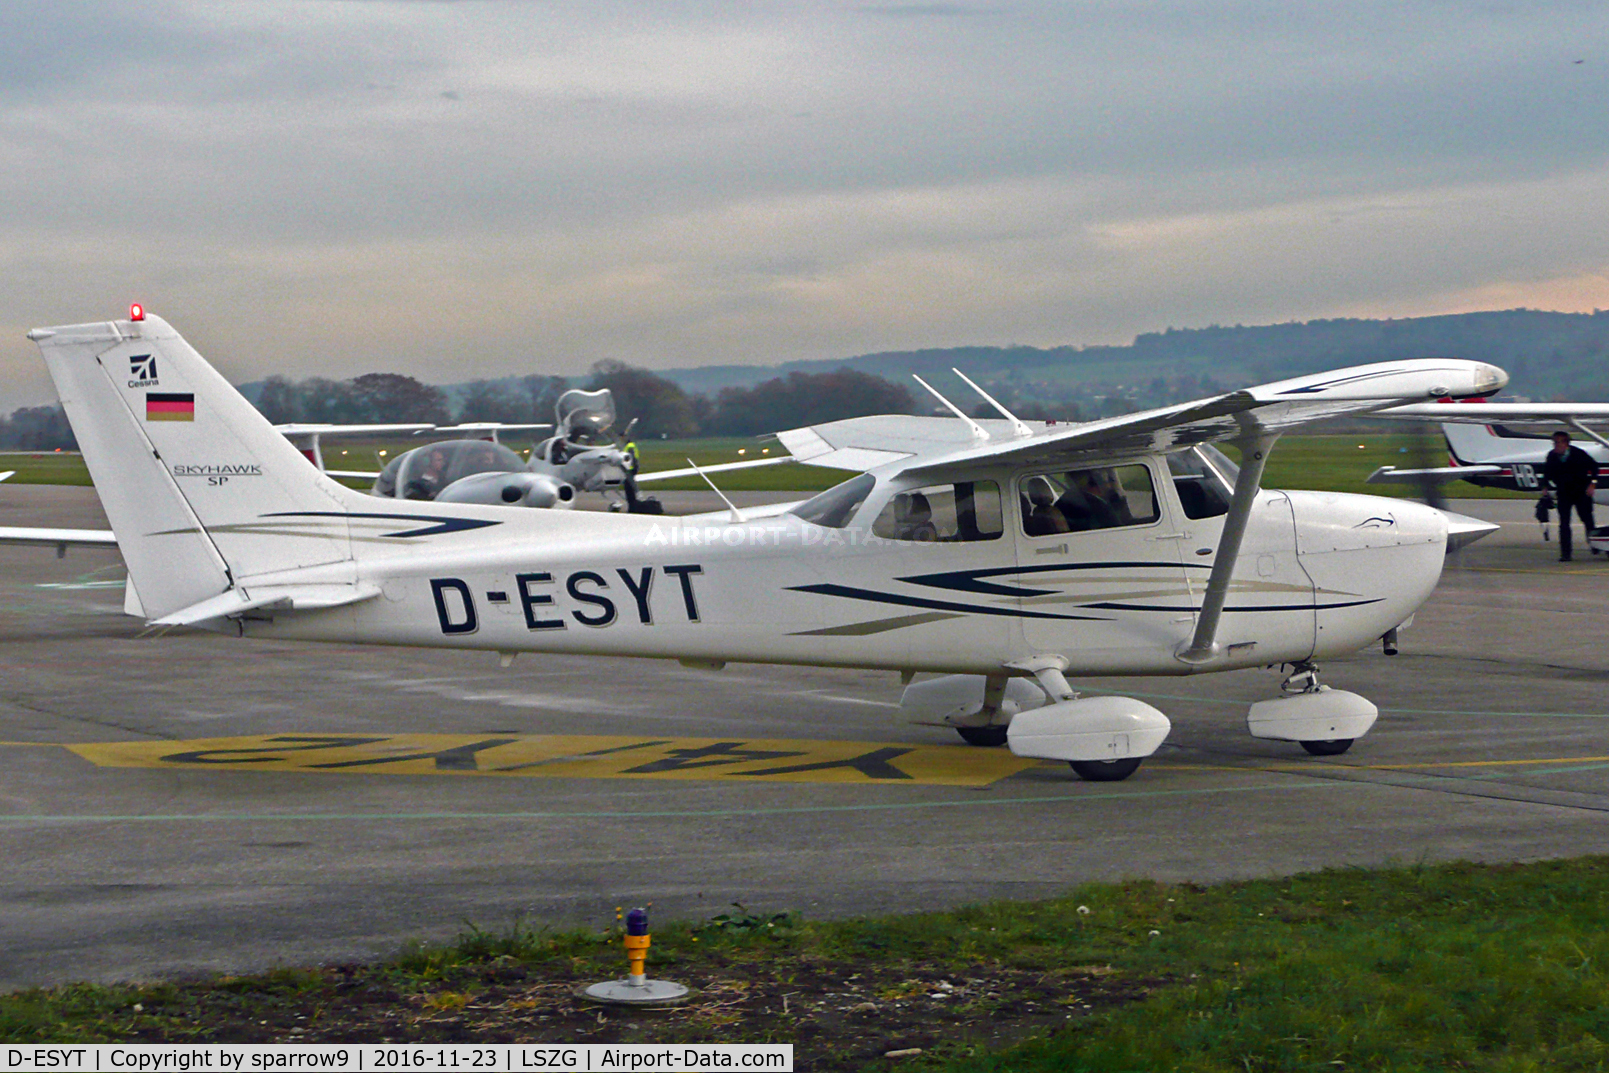 D-ESYT, 2007 Cessna 172S C/N 172S10524, A short visit to Grenchen